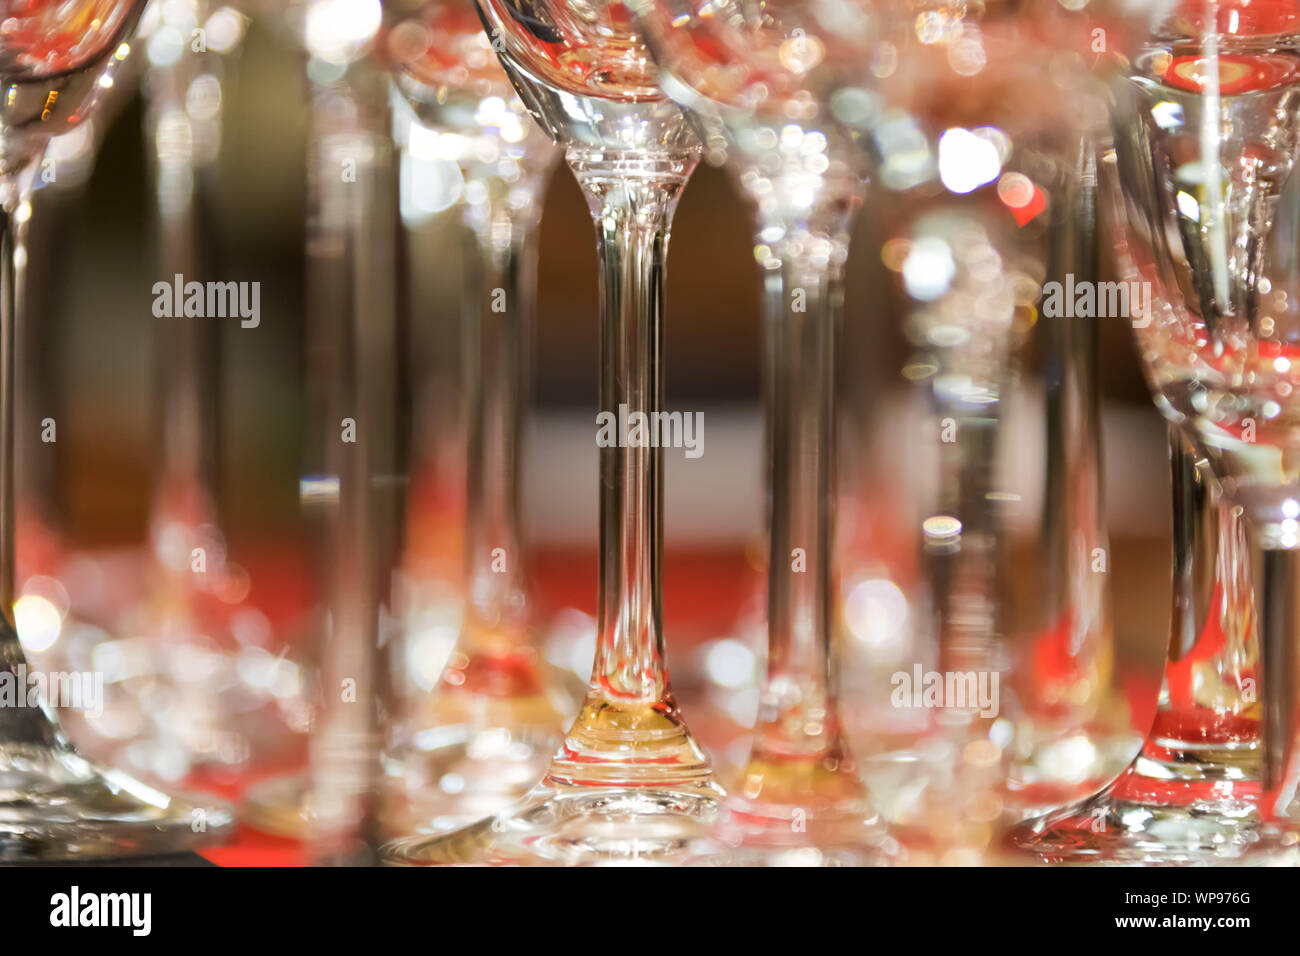 Bunch of glasses on a table bar Stock Photo